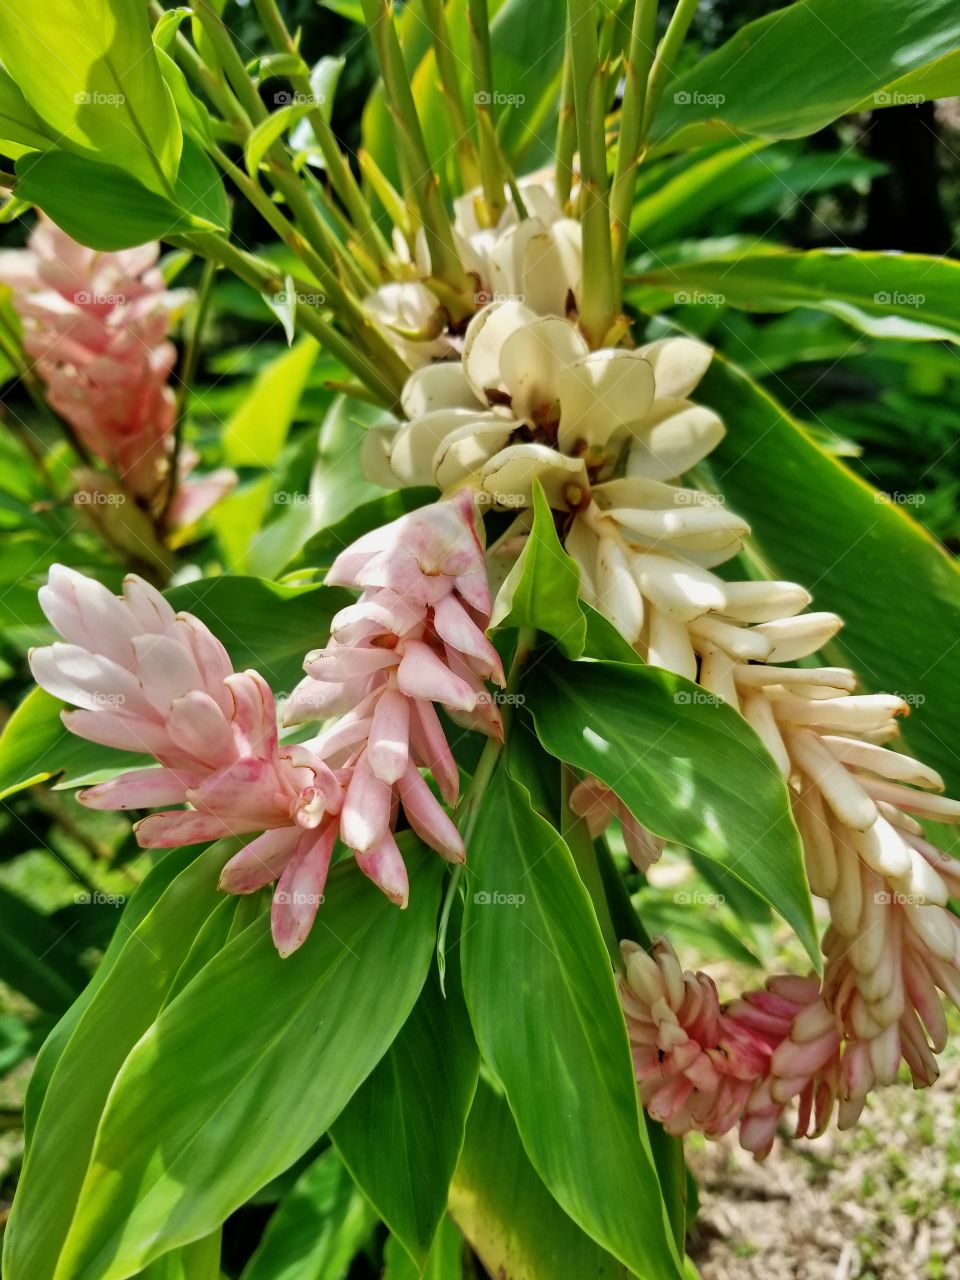 Some beautiful pinkish and white flower in tropical St Lucia